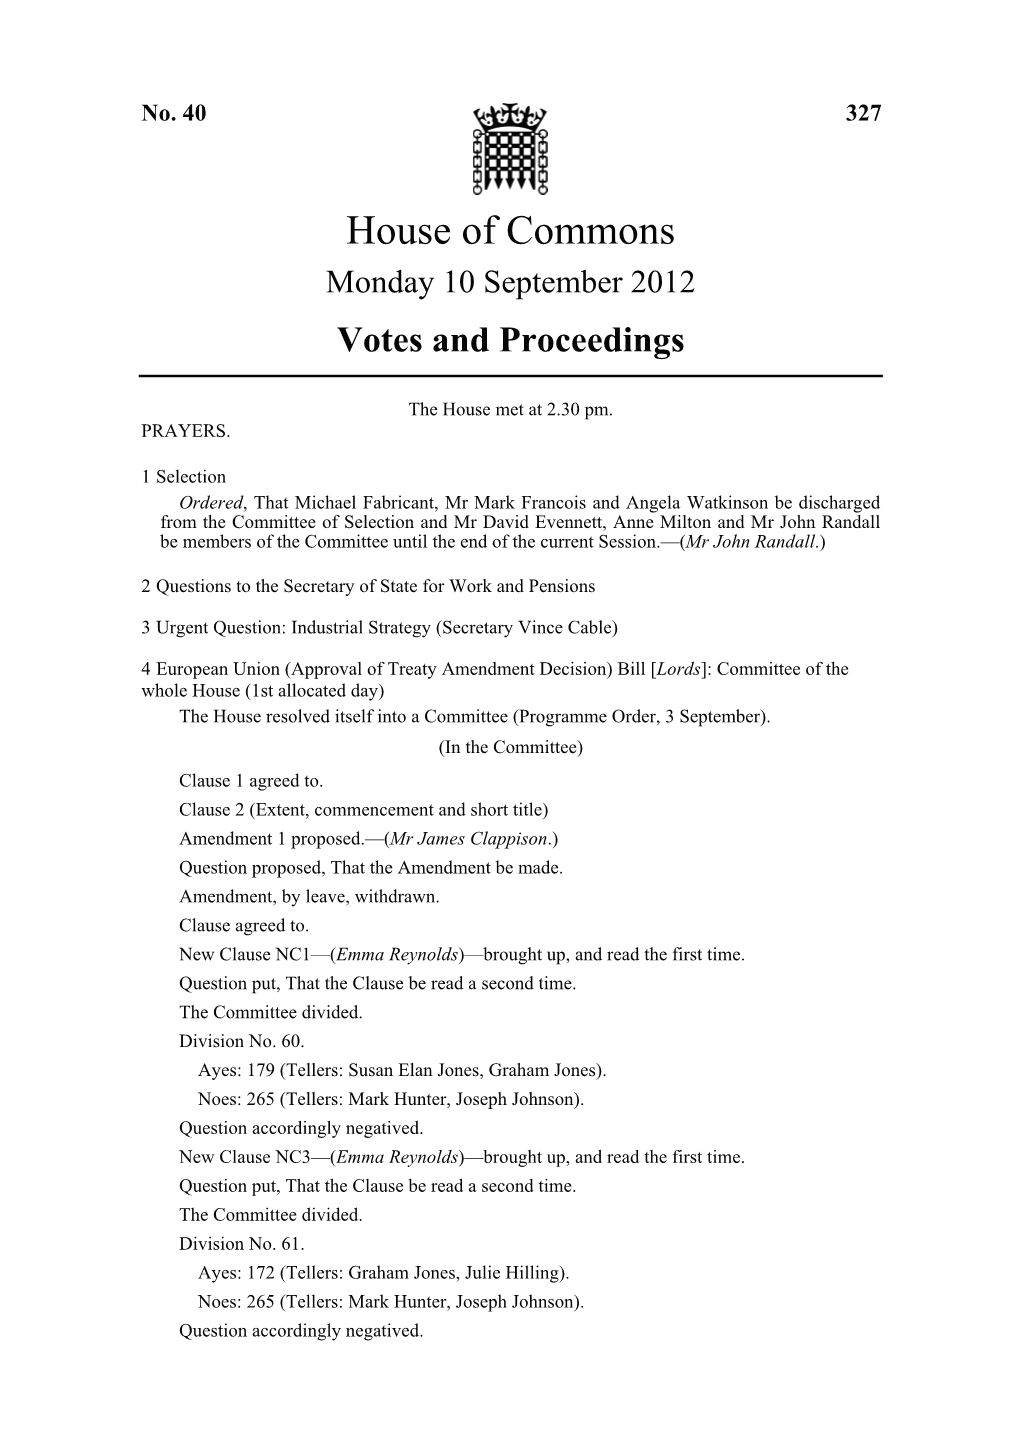 House of Commons Monday 10 September 2012 Votes and Proceedings